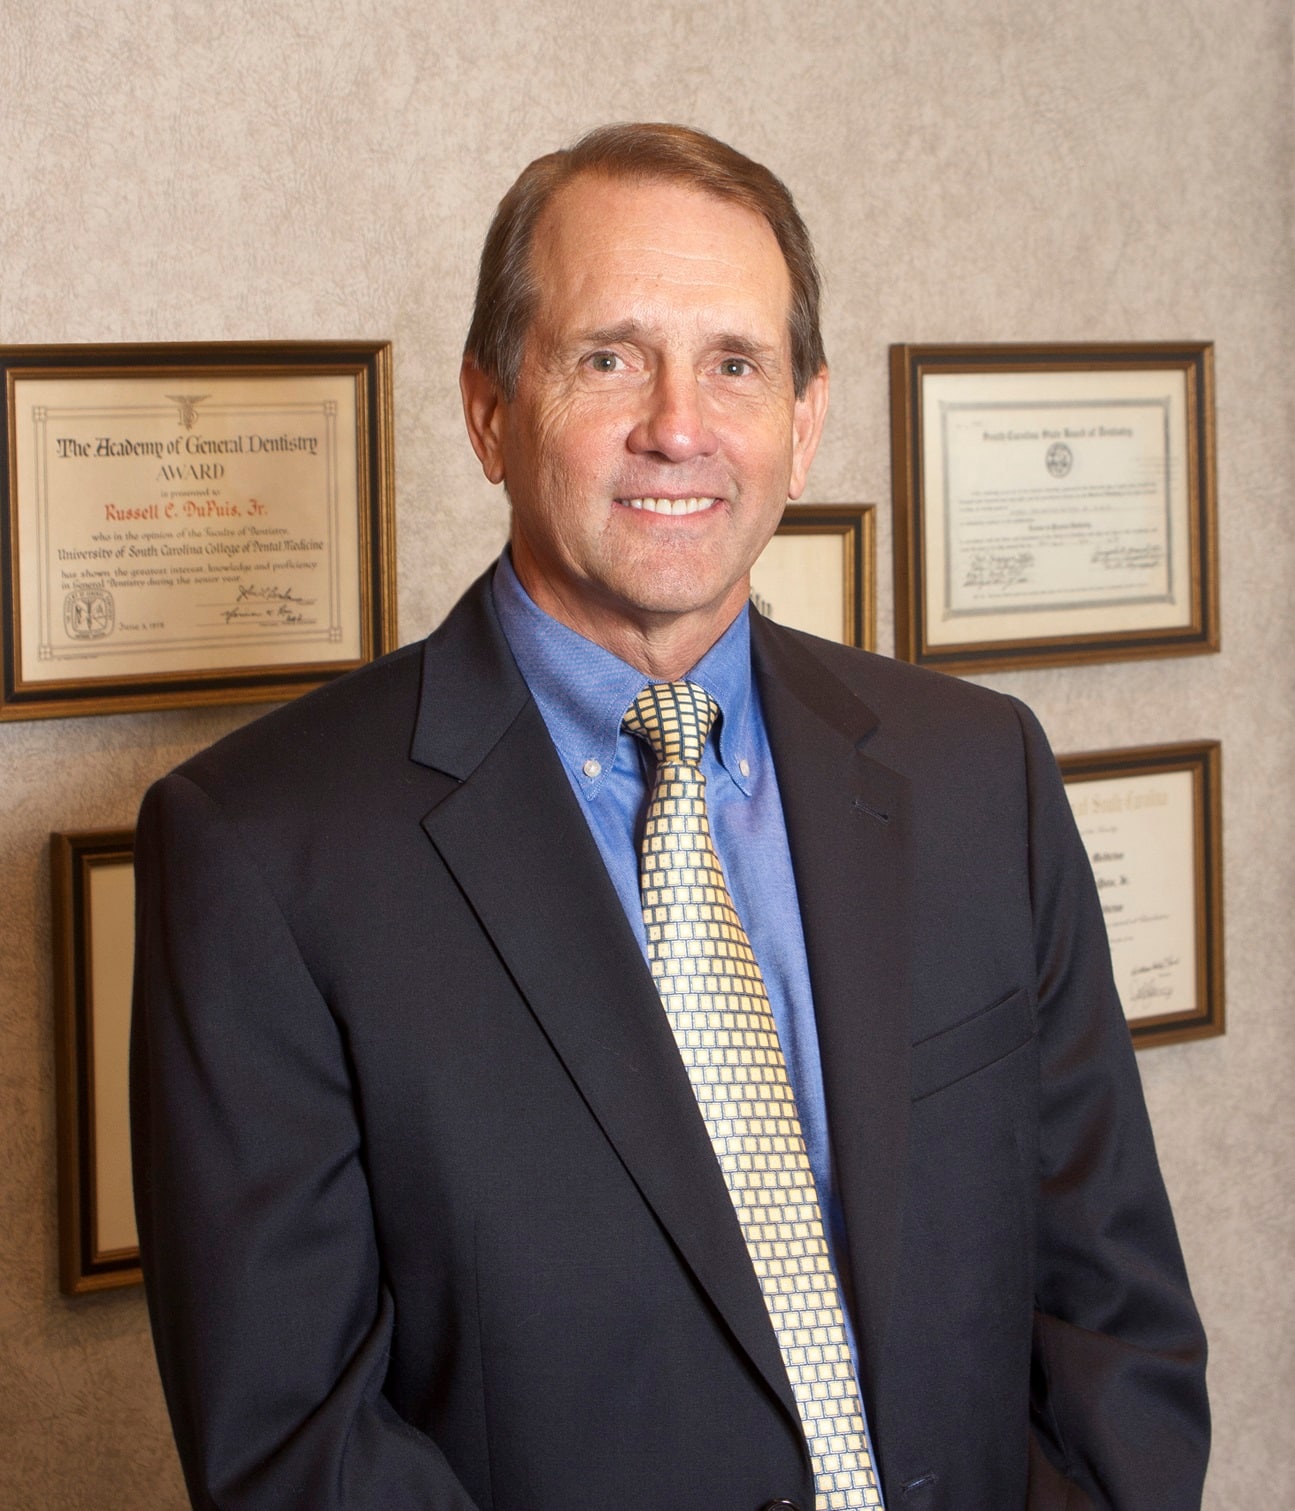 Dr. Russell Creighton Dupuis, DDS